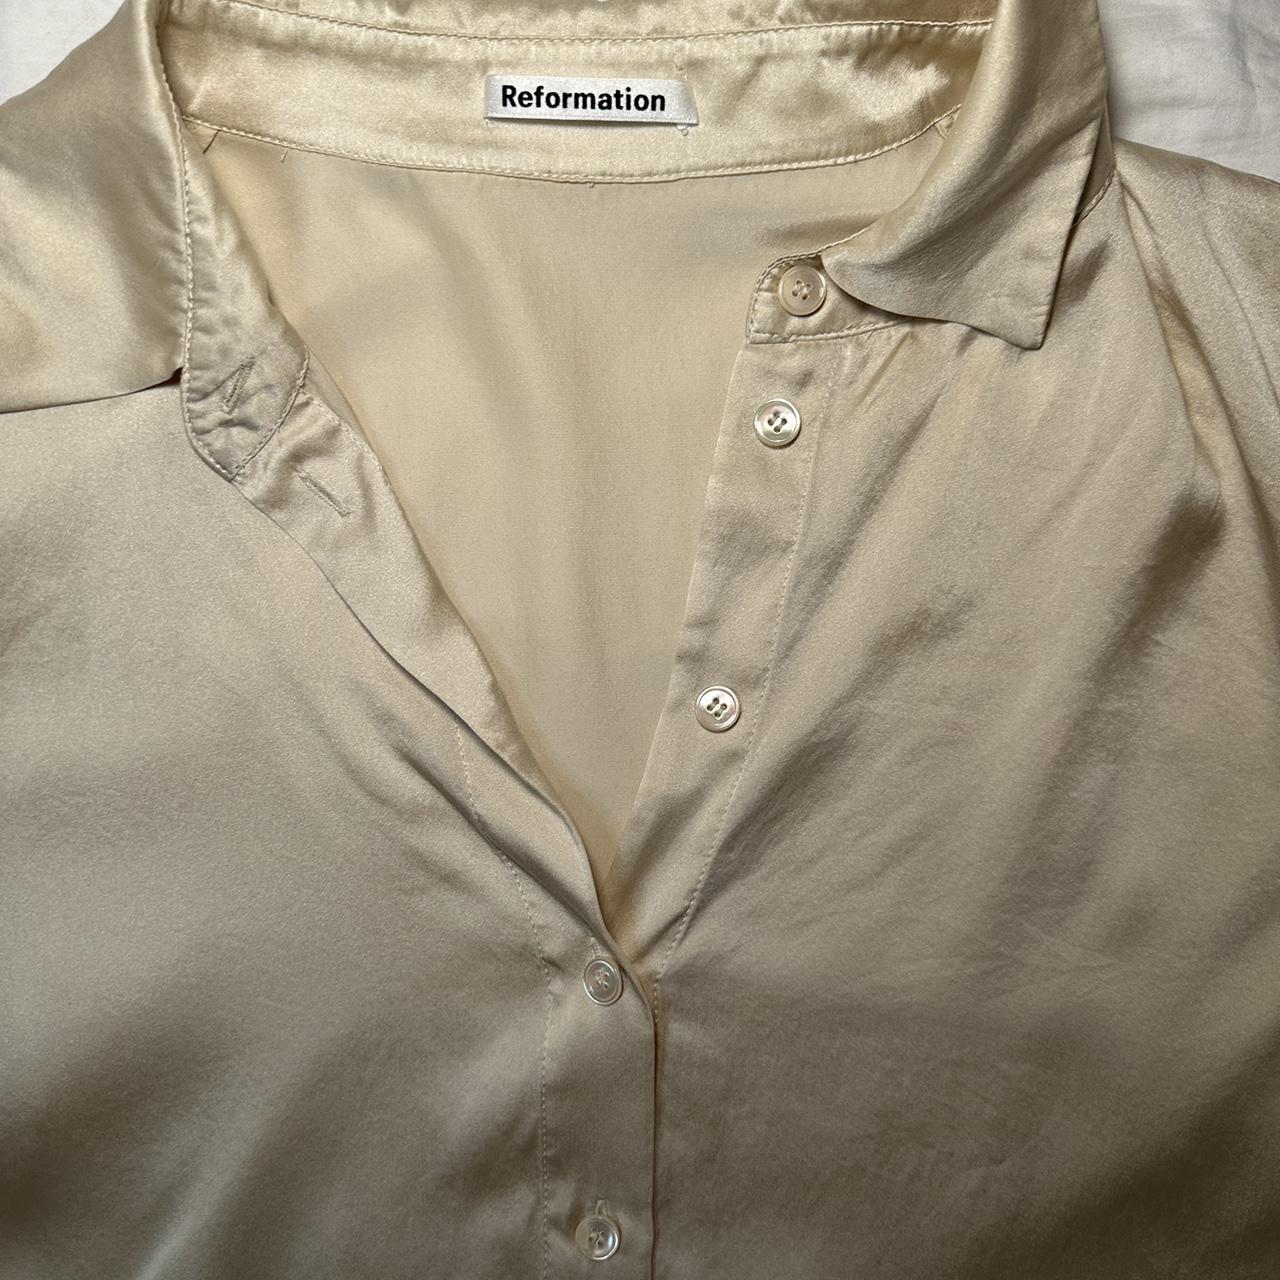 Reformation Women's Cream and Tan Blouse (3)